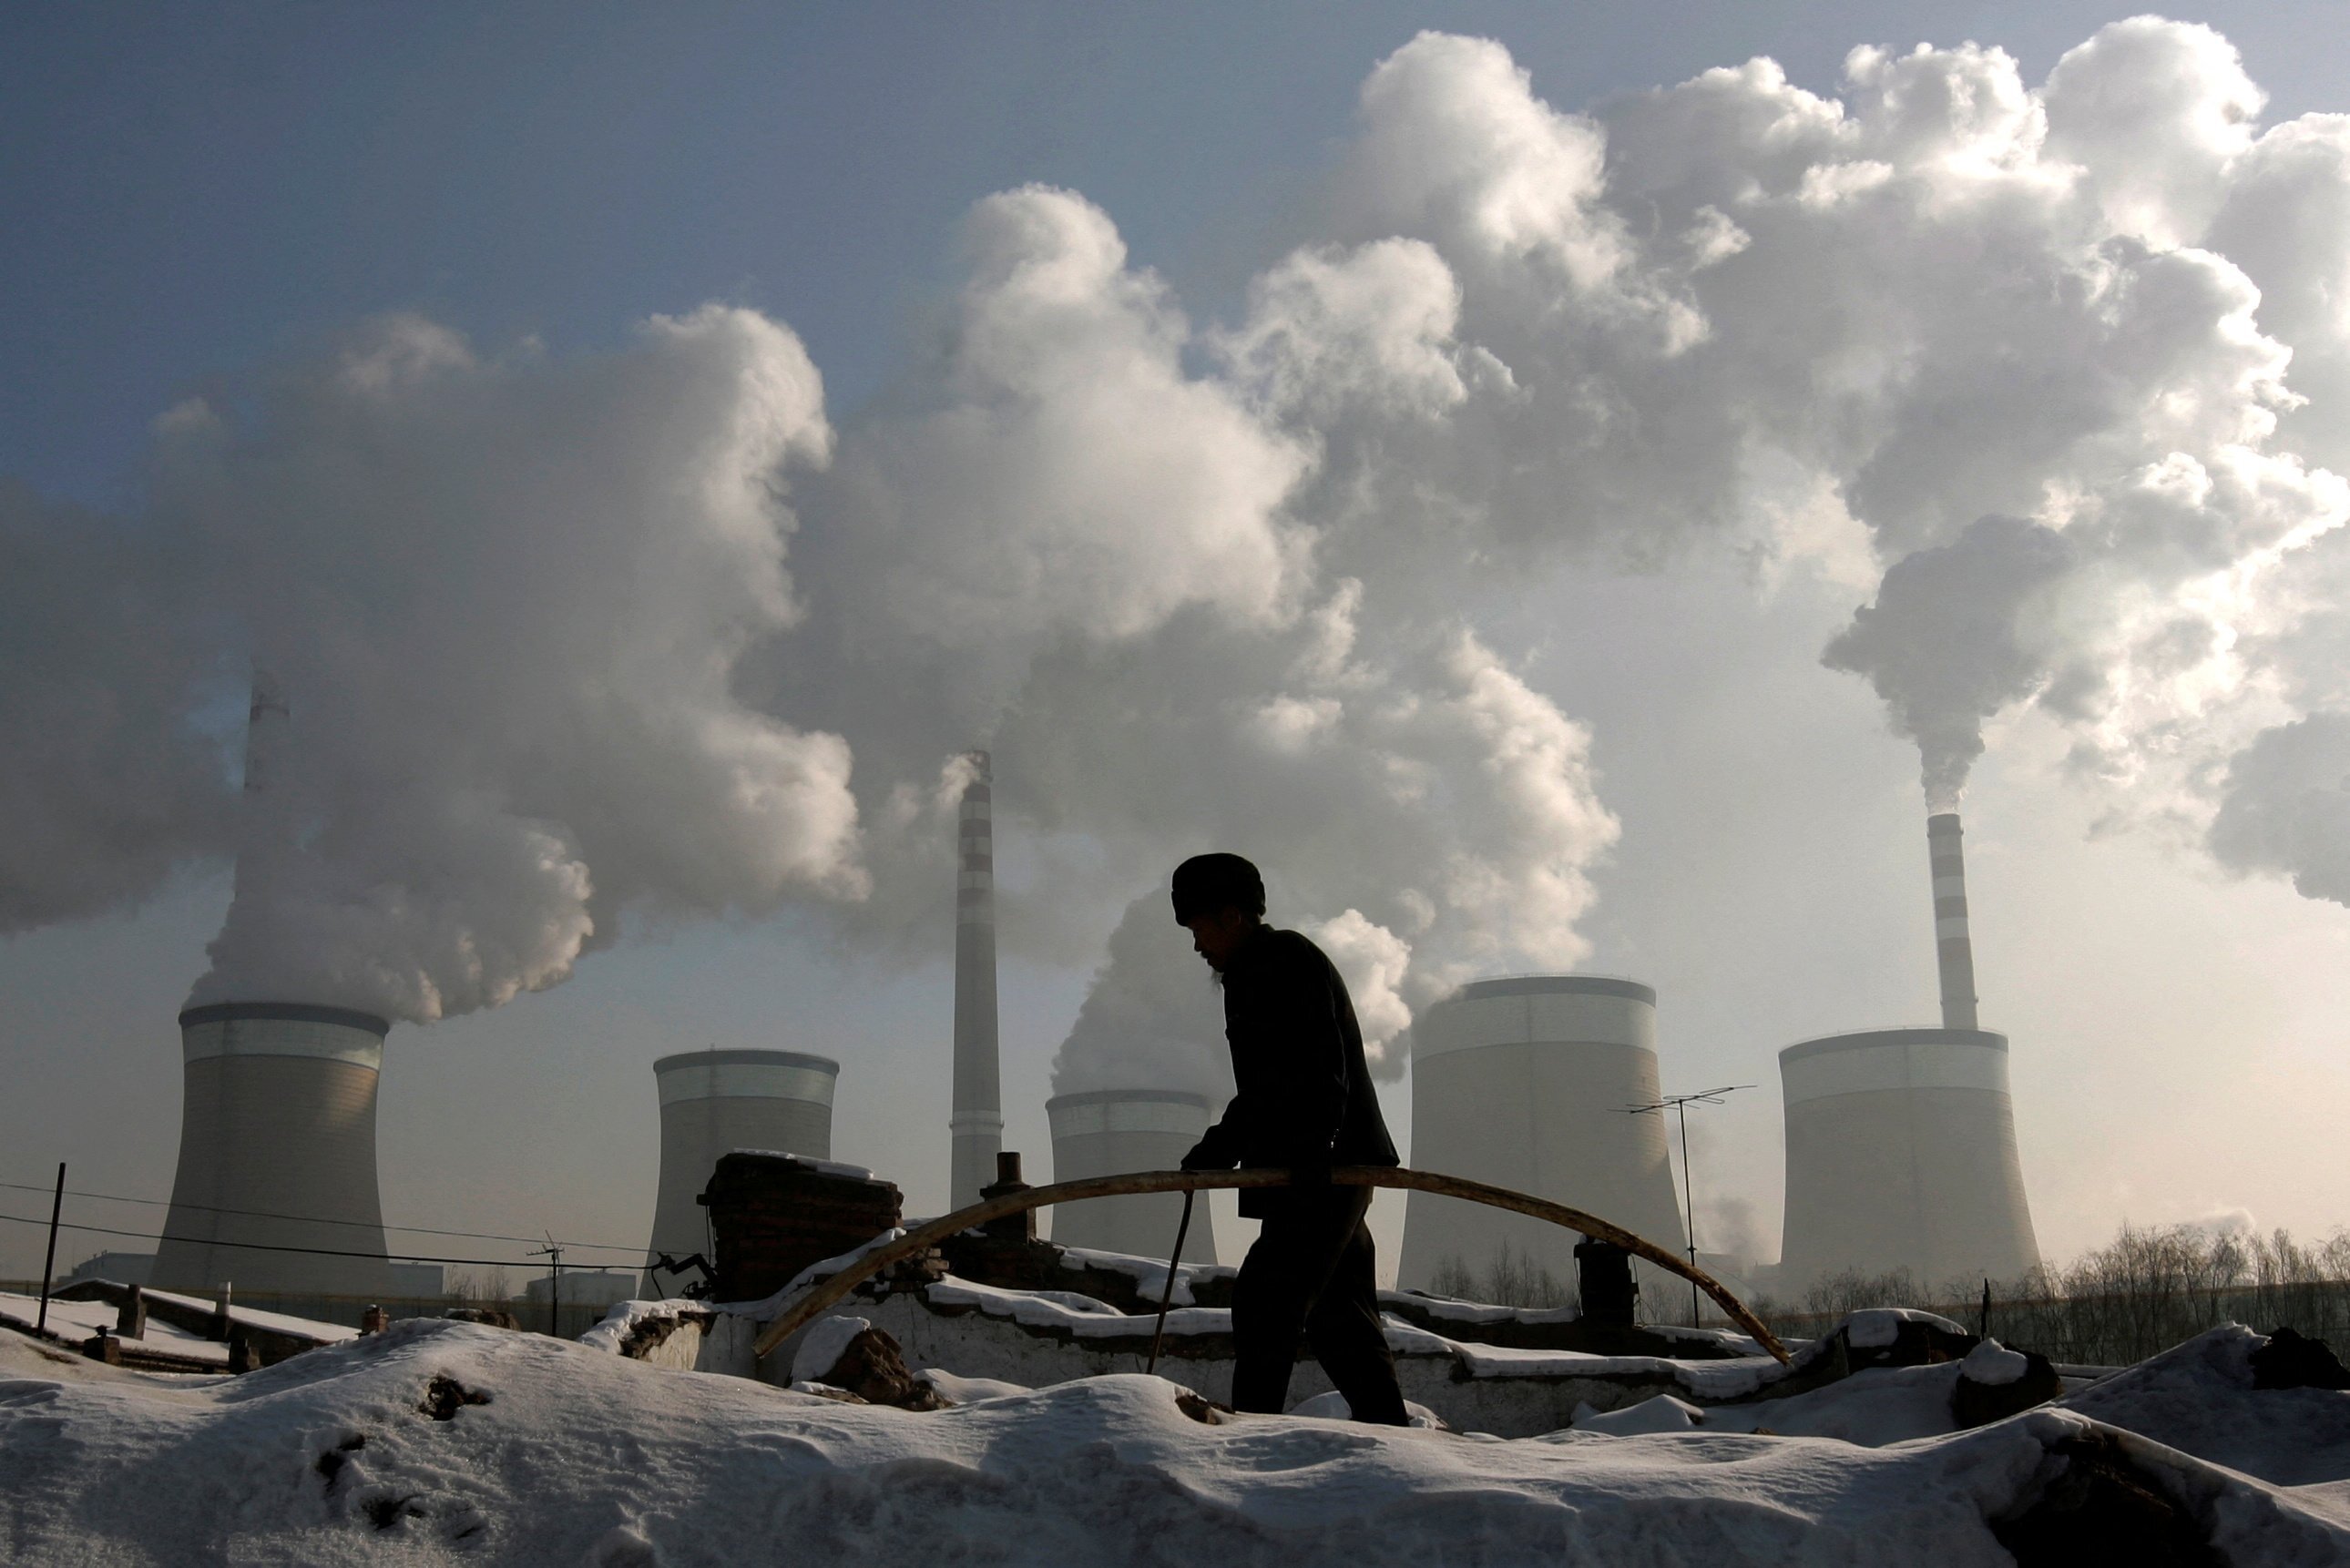 A villager walks in front of a coal-fired power plant on the outskirts of Datong, Shanxi province in China. Photo: Reuters